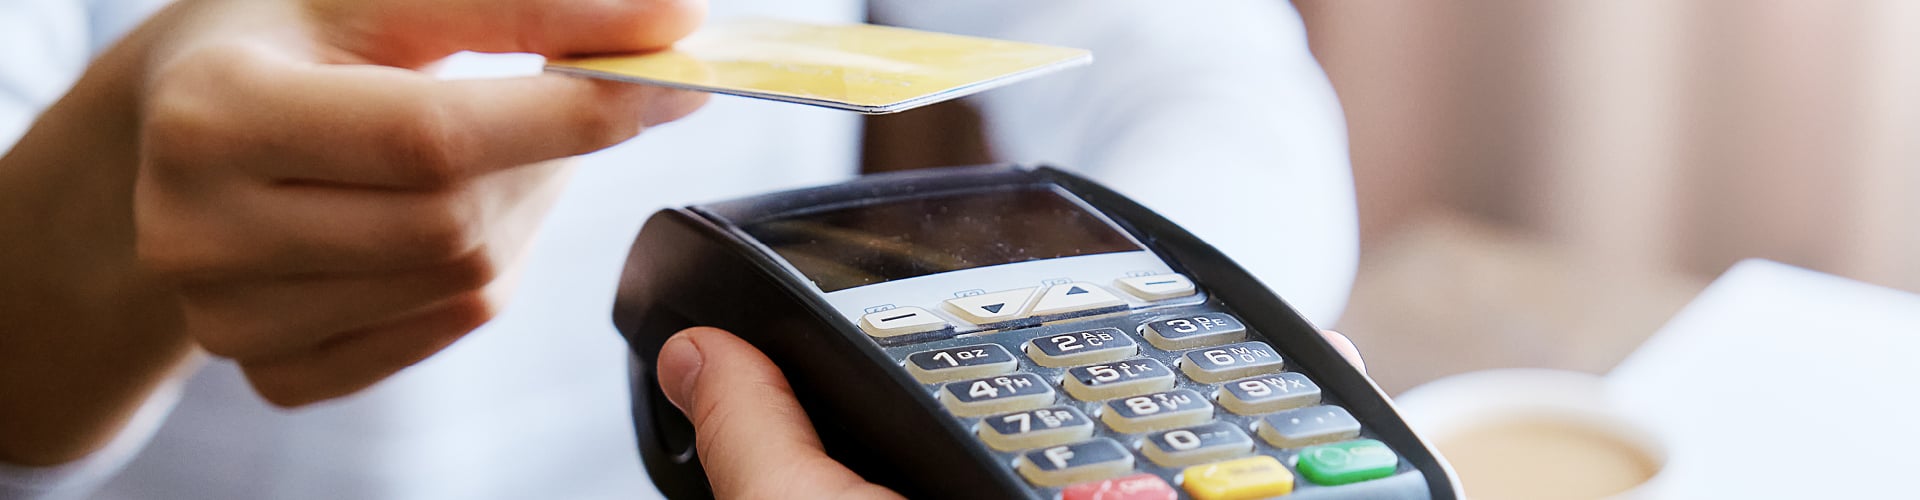 Customer paying bill using contactless card machine